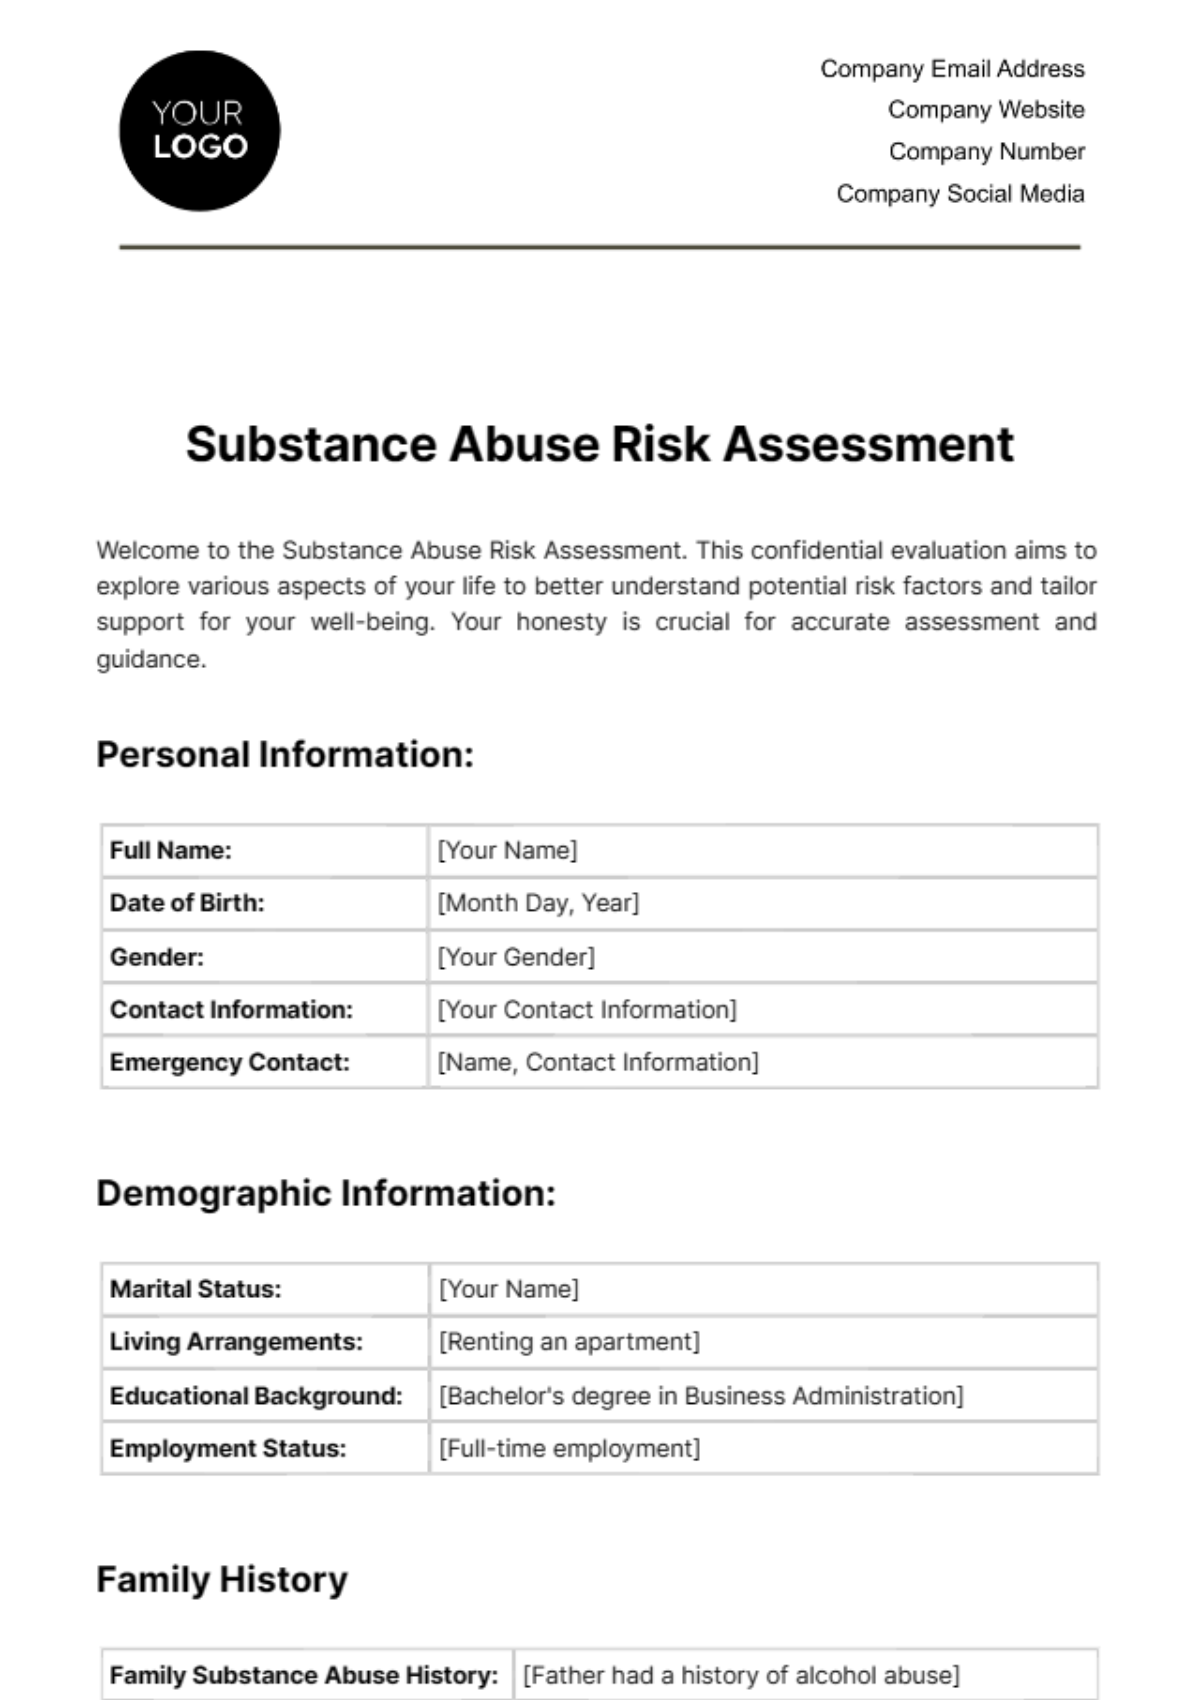 Free Substance Abuse Risk Assessment Template